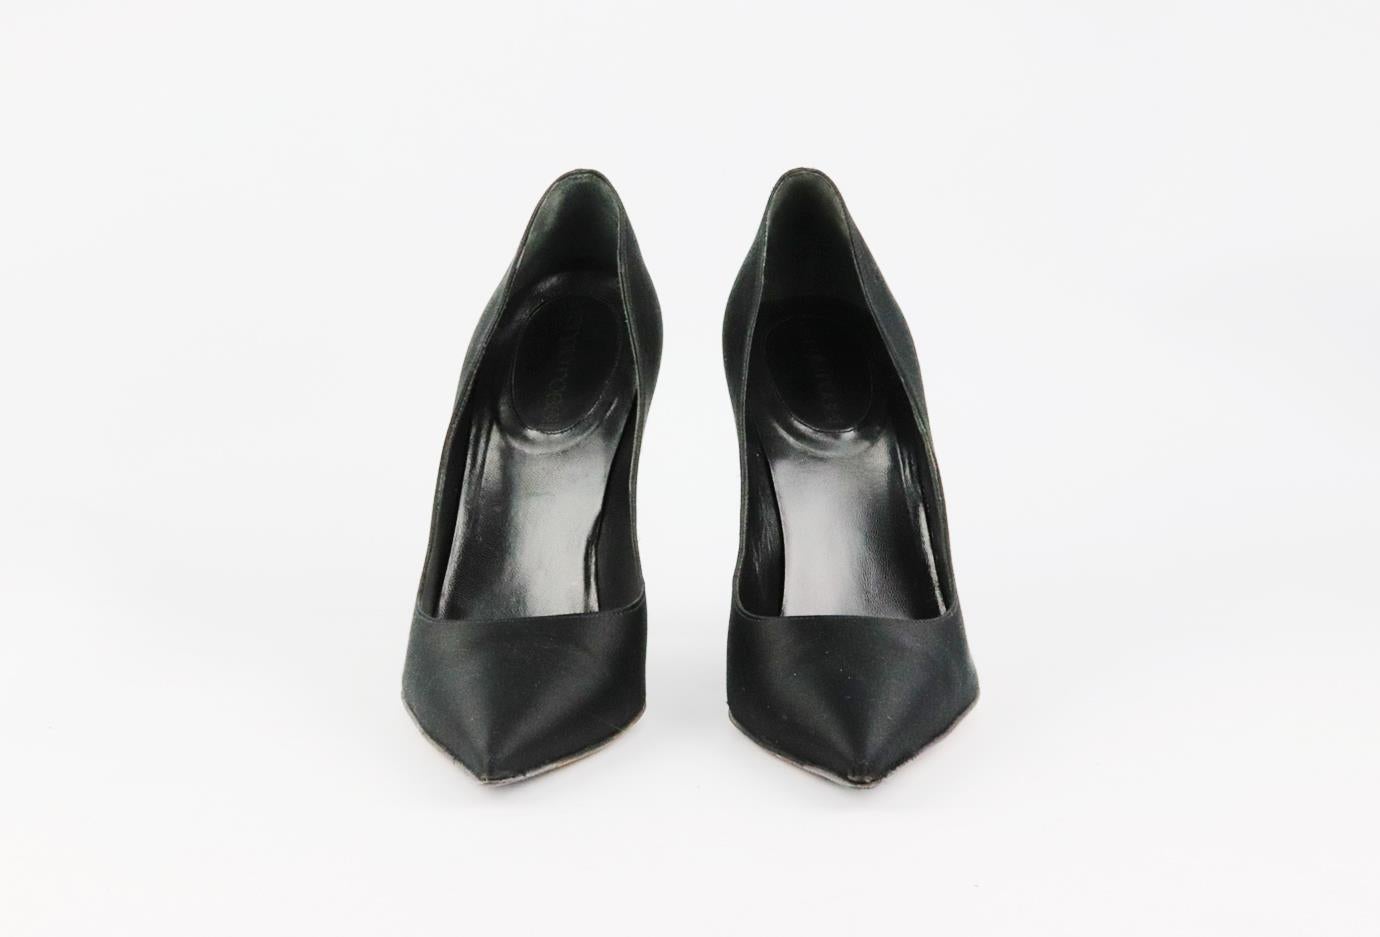 These pumps by Sergio Rossi are a classic style that will never date, made in Italy from black satin, they have sharp pointed toes and striking 89 mm structured heels to take you from morning meetings to dinner with friends. Heel measures